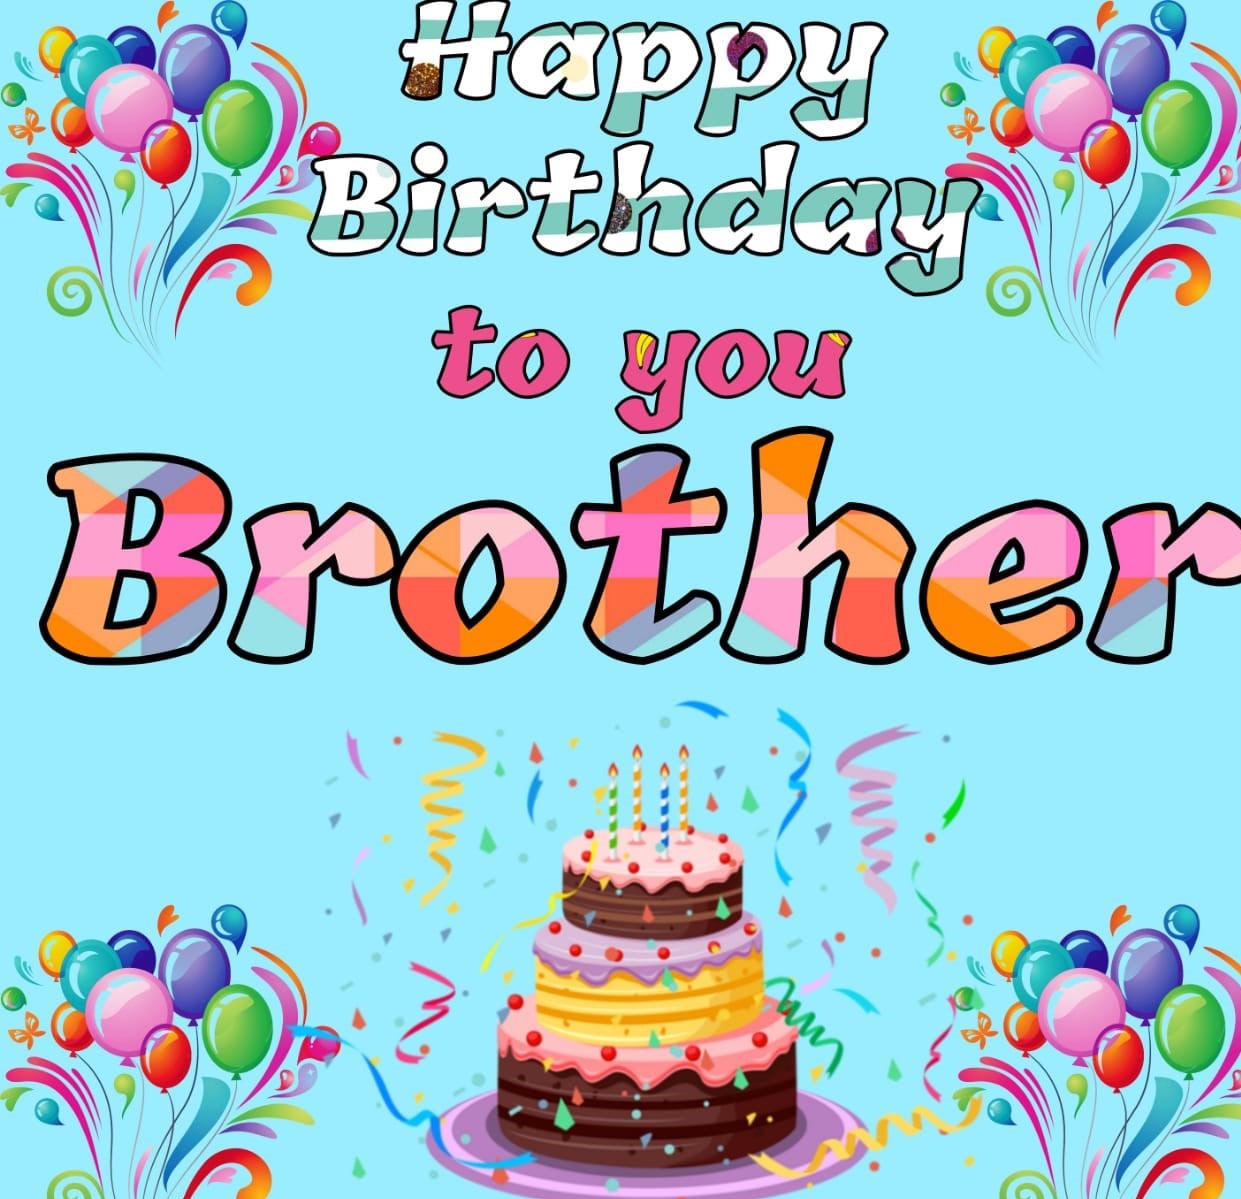 Happy Birthday Wishes For Brother with Images, Quotes and Messages